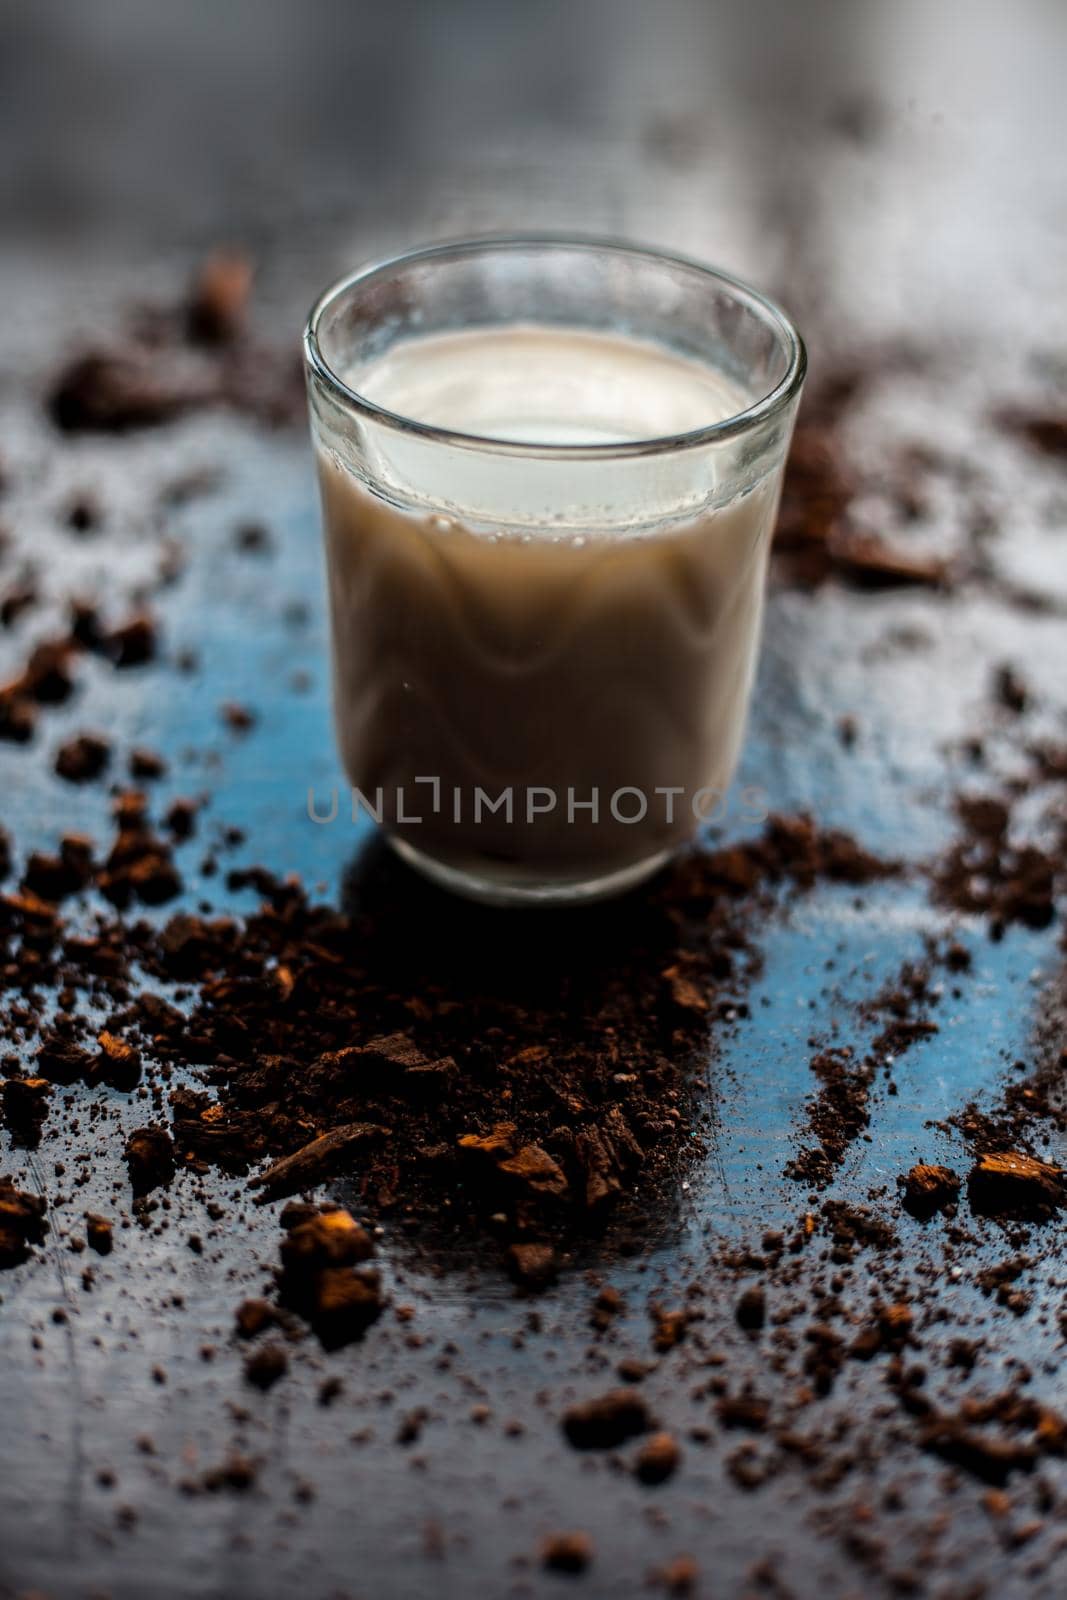 HIGH ANGLE SHOT OF GLASS OF MILK WITH SOME COCOA POWDER SPRINKLED ON BLACK GLOSSY SURFACE.